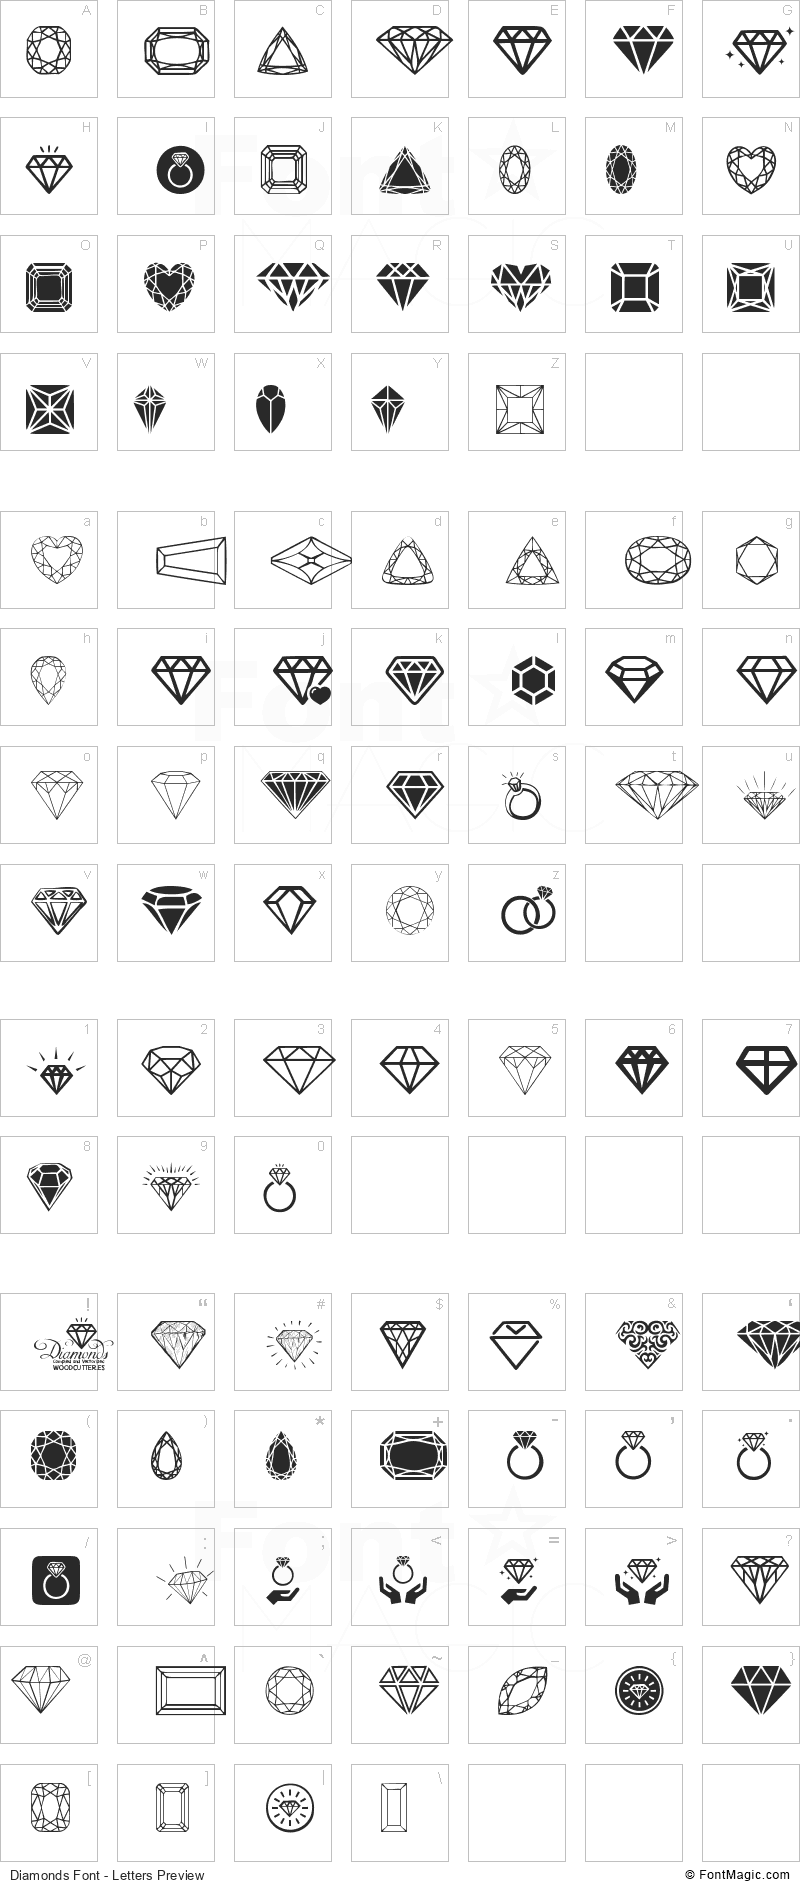 Diamonds Font - All Latters Preview Chart